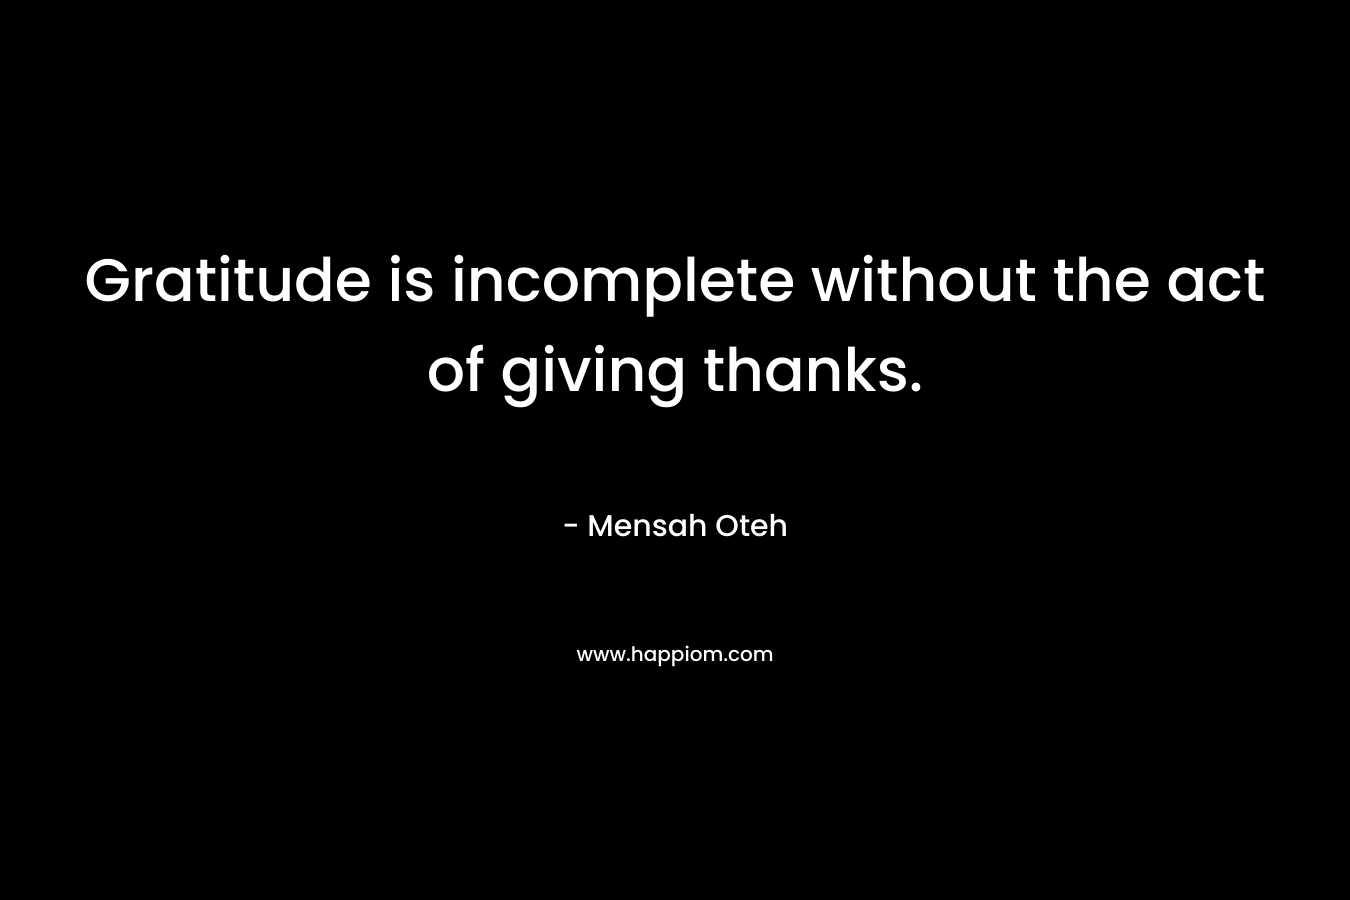 Gratitude is incomplete without the act of giving thanks.